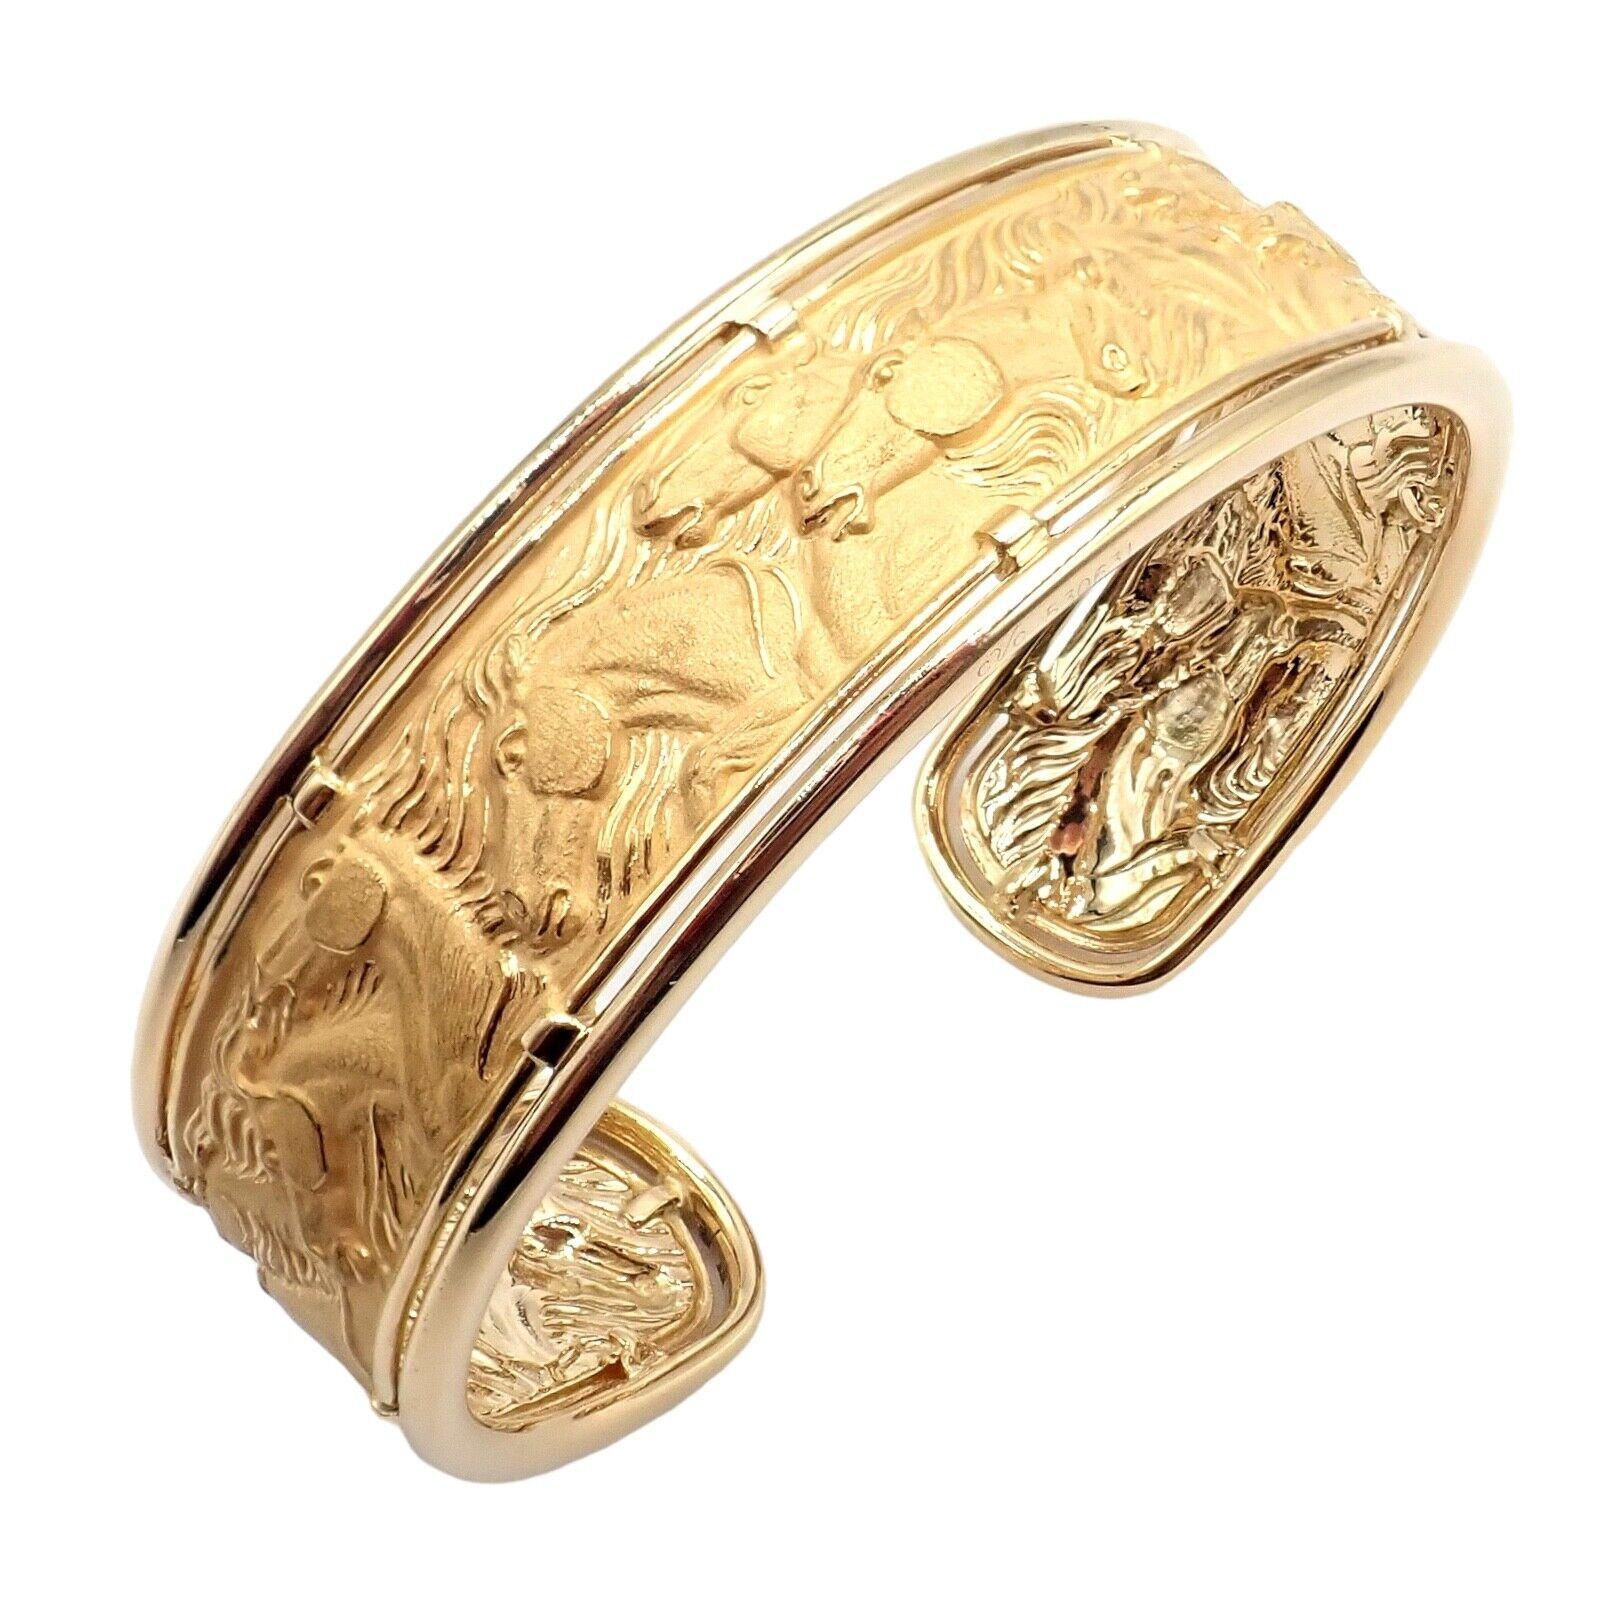 18k Yellow Gold Equine Horse Stampede Cuff Bangle Bracelet by Carrera Y Carrera. 
Details: 
Length: Fits 6.5